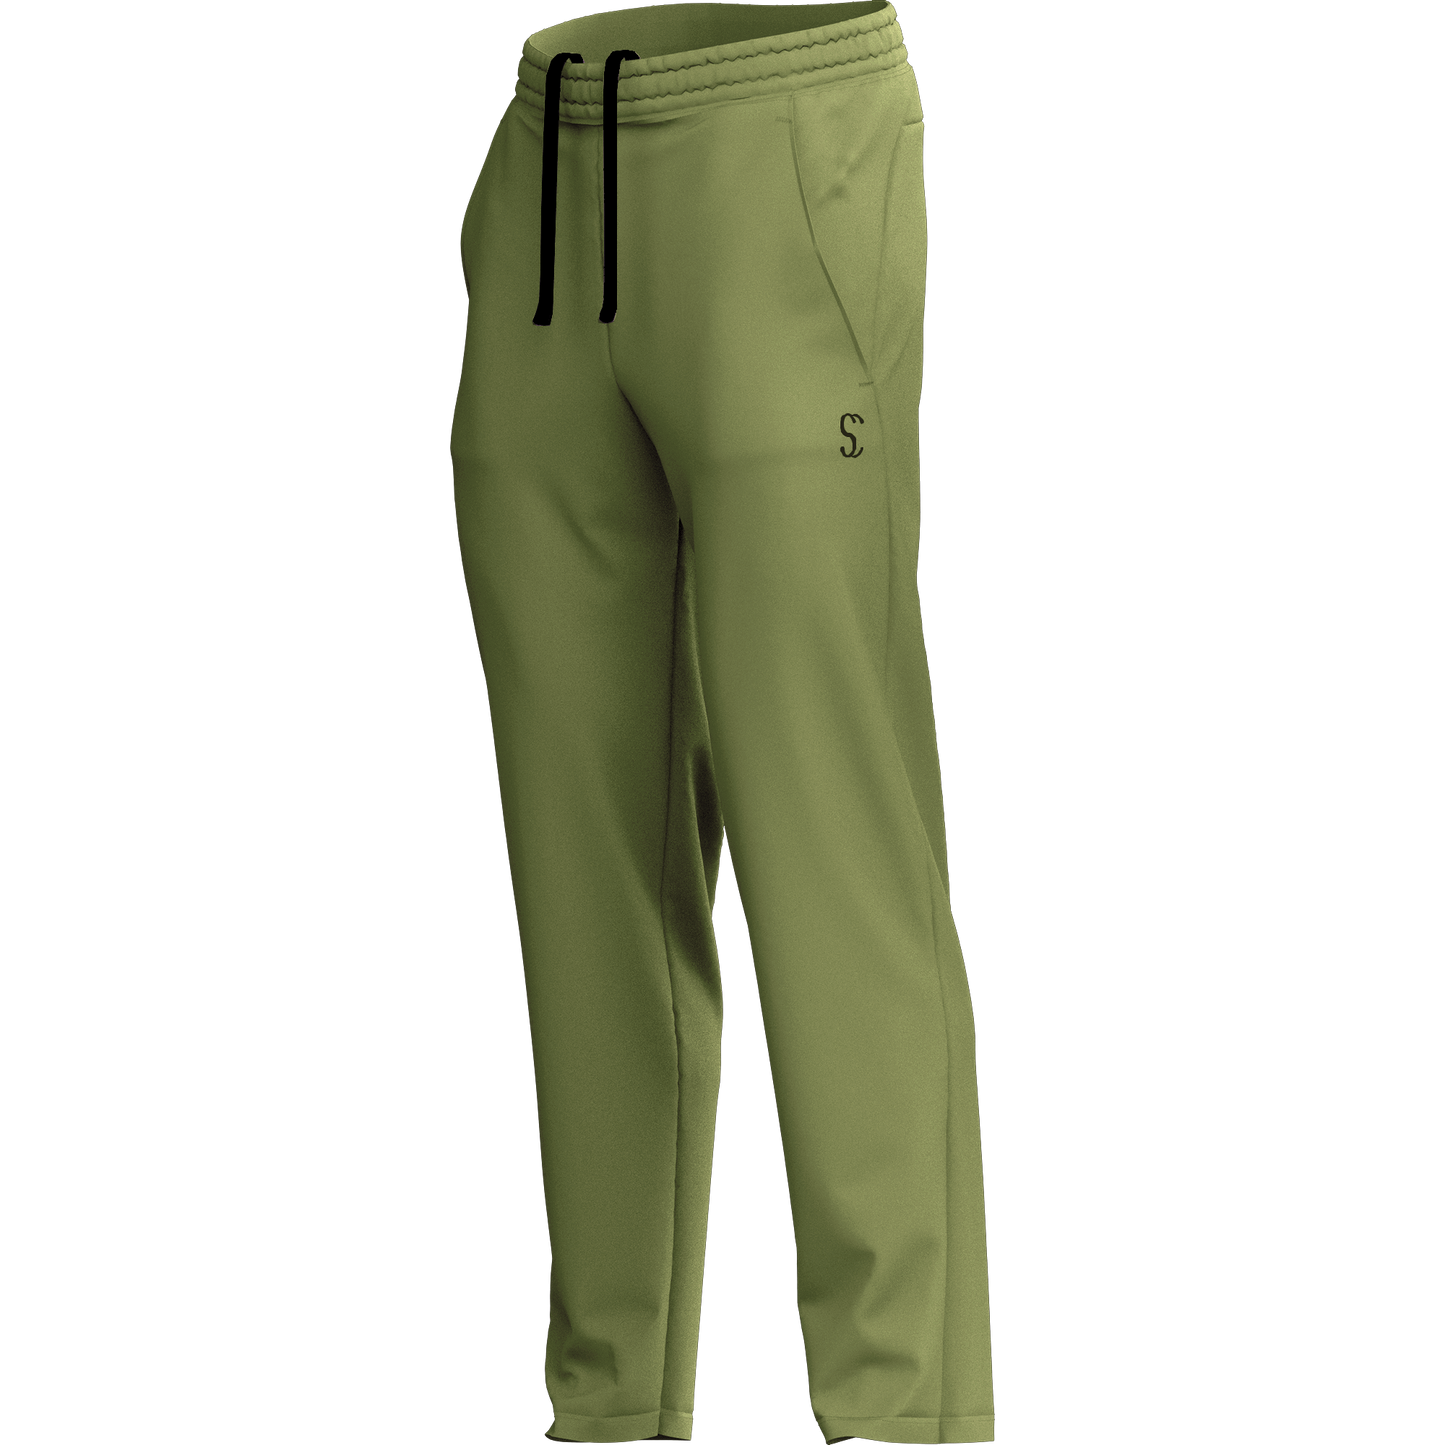 Men's Green Poly Fleece Thermal Tracksuit Bottoms